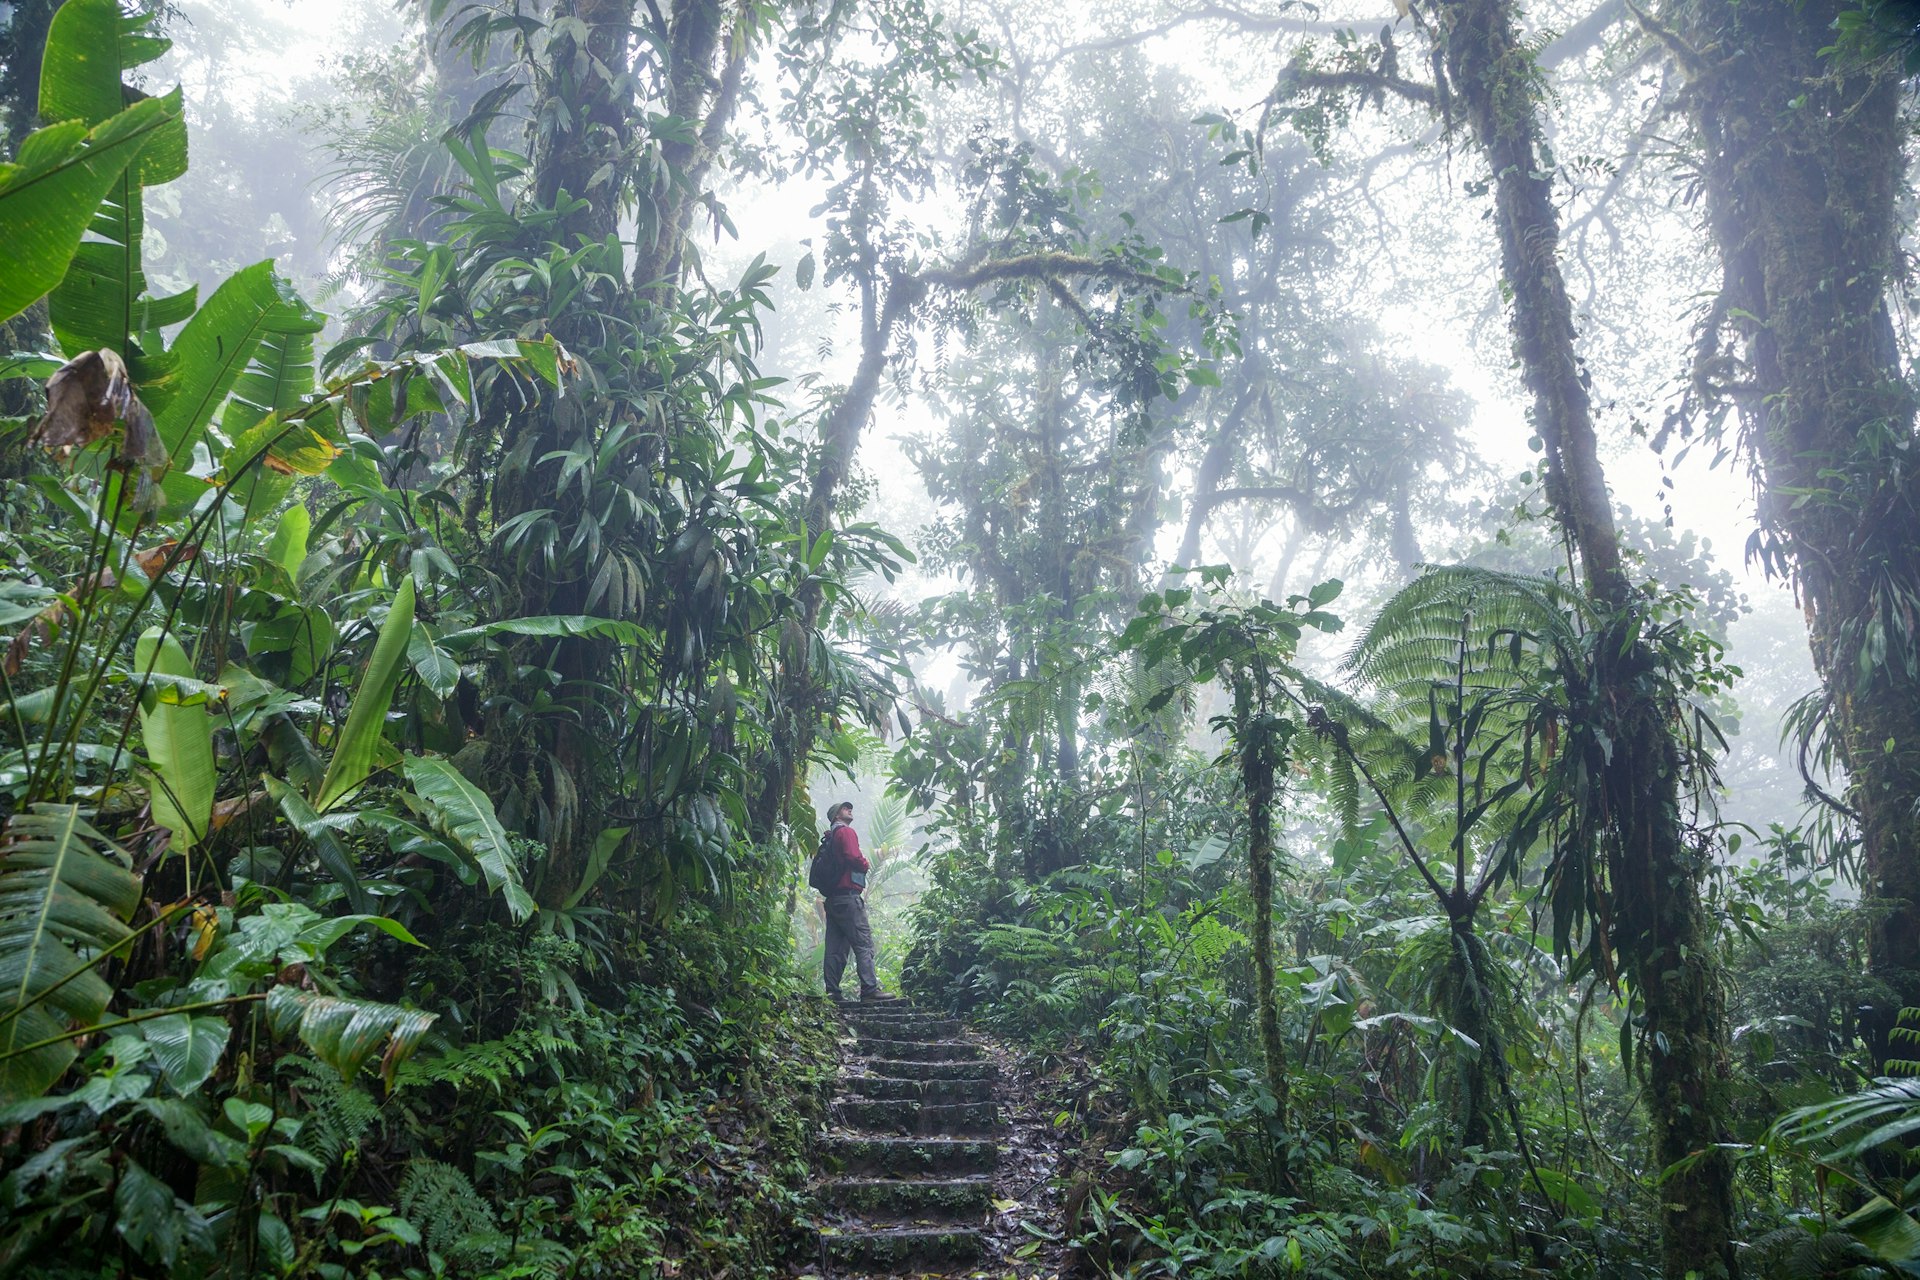 A hiker stands on stone steps surrounded by green trees in the cloud forest of Monteverde in Costa Rica.